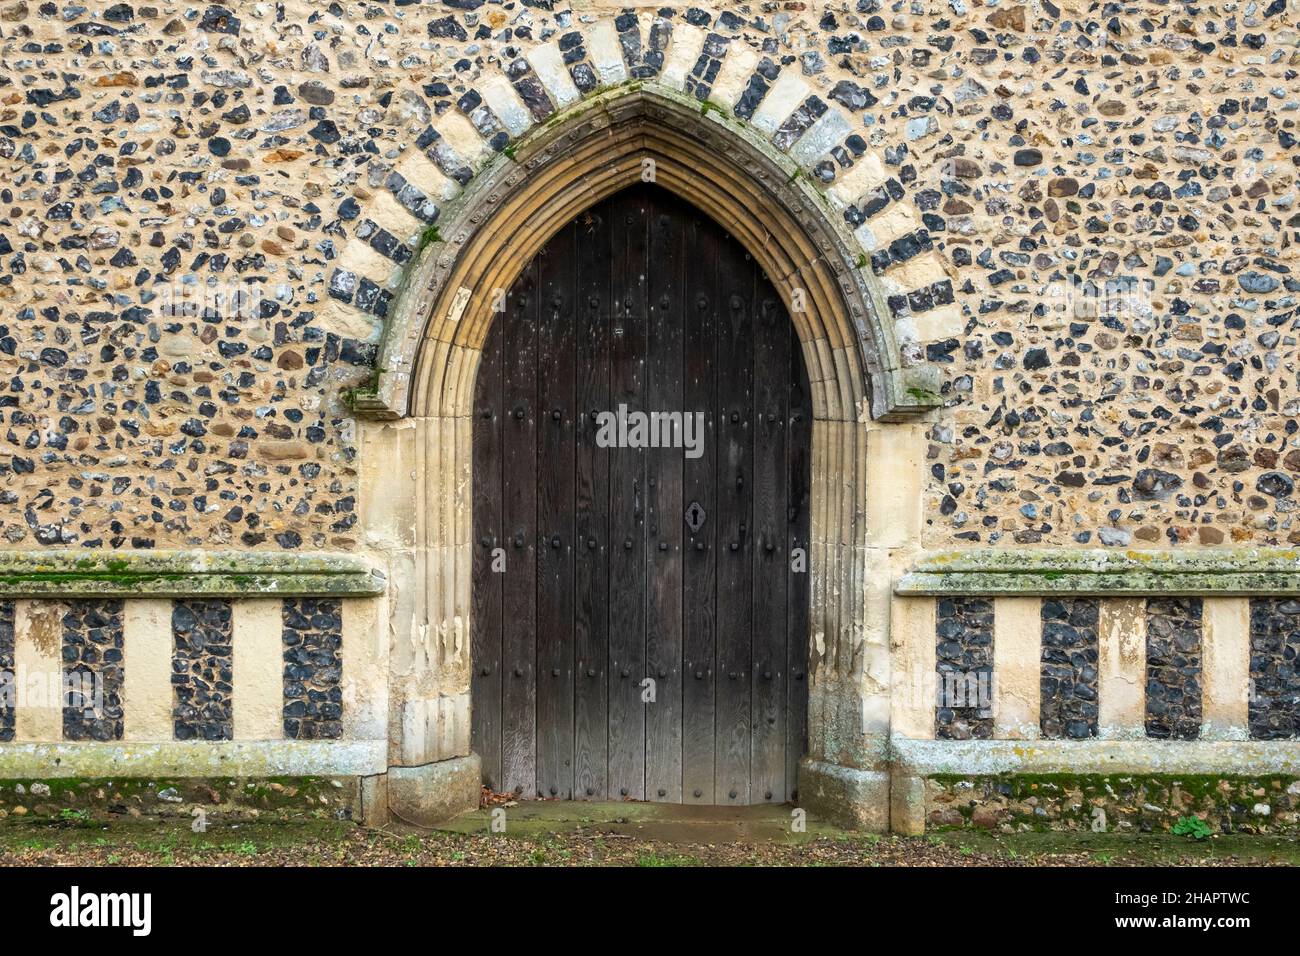 Decorated flushwork doorway surround at the Church of St Mary of the Assumption, Ufford, Suffolk Stock Photo